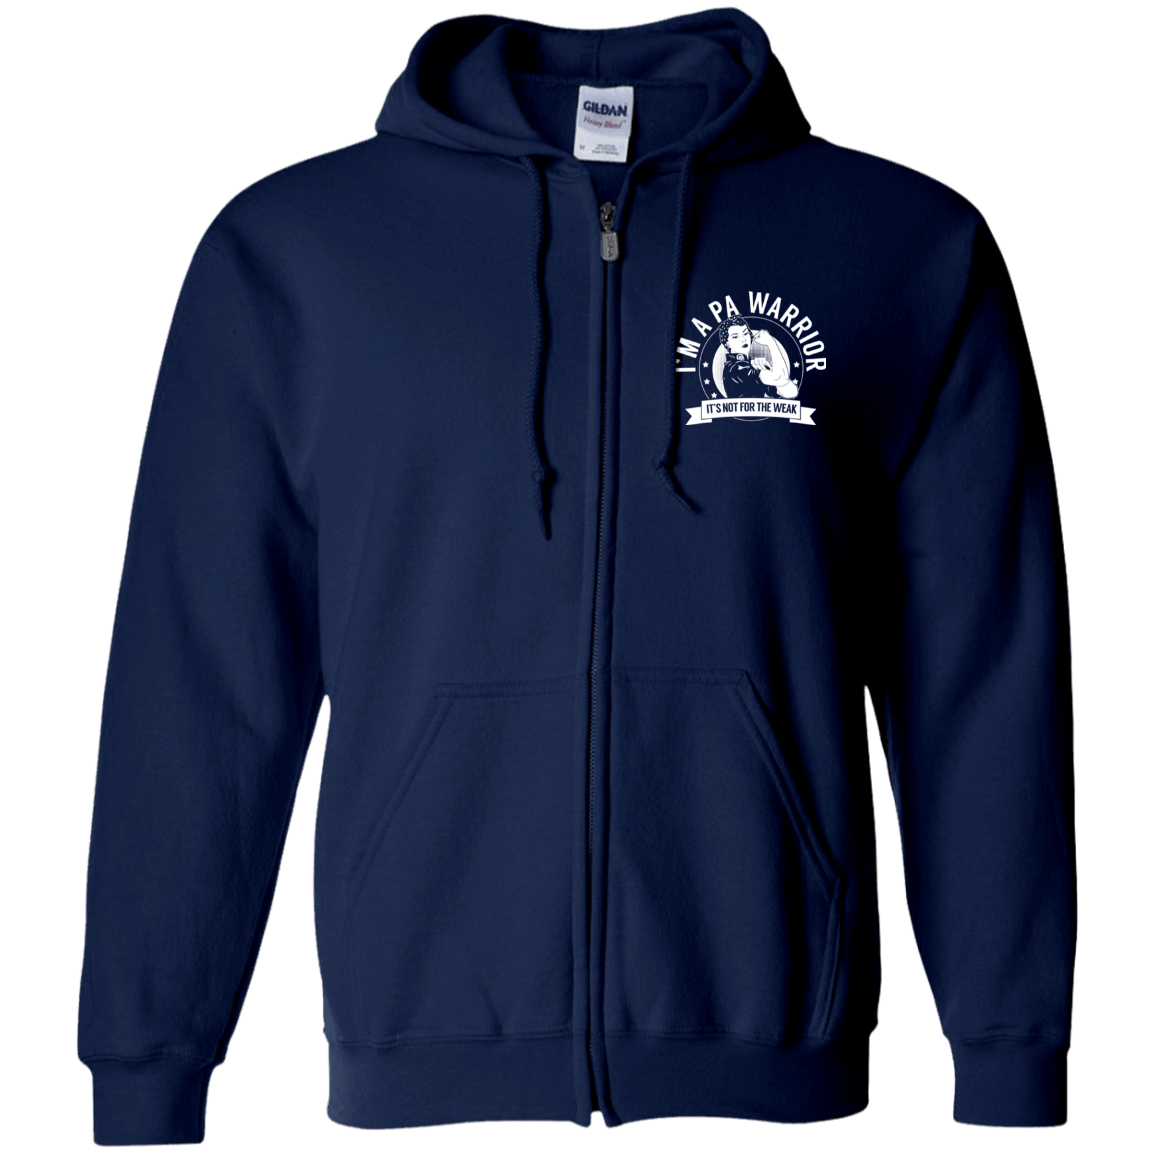 Pernicious Anaemia - PA Warrior NFTW Zip Up Hooded Sweatshirt - The Unchargeables